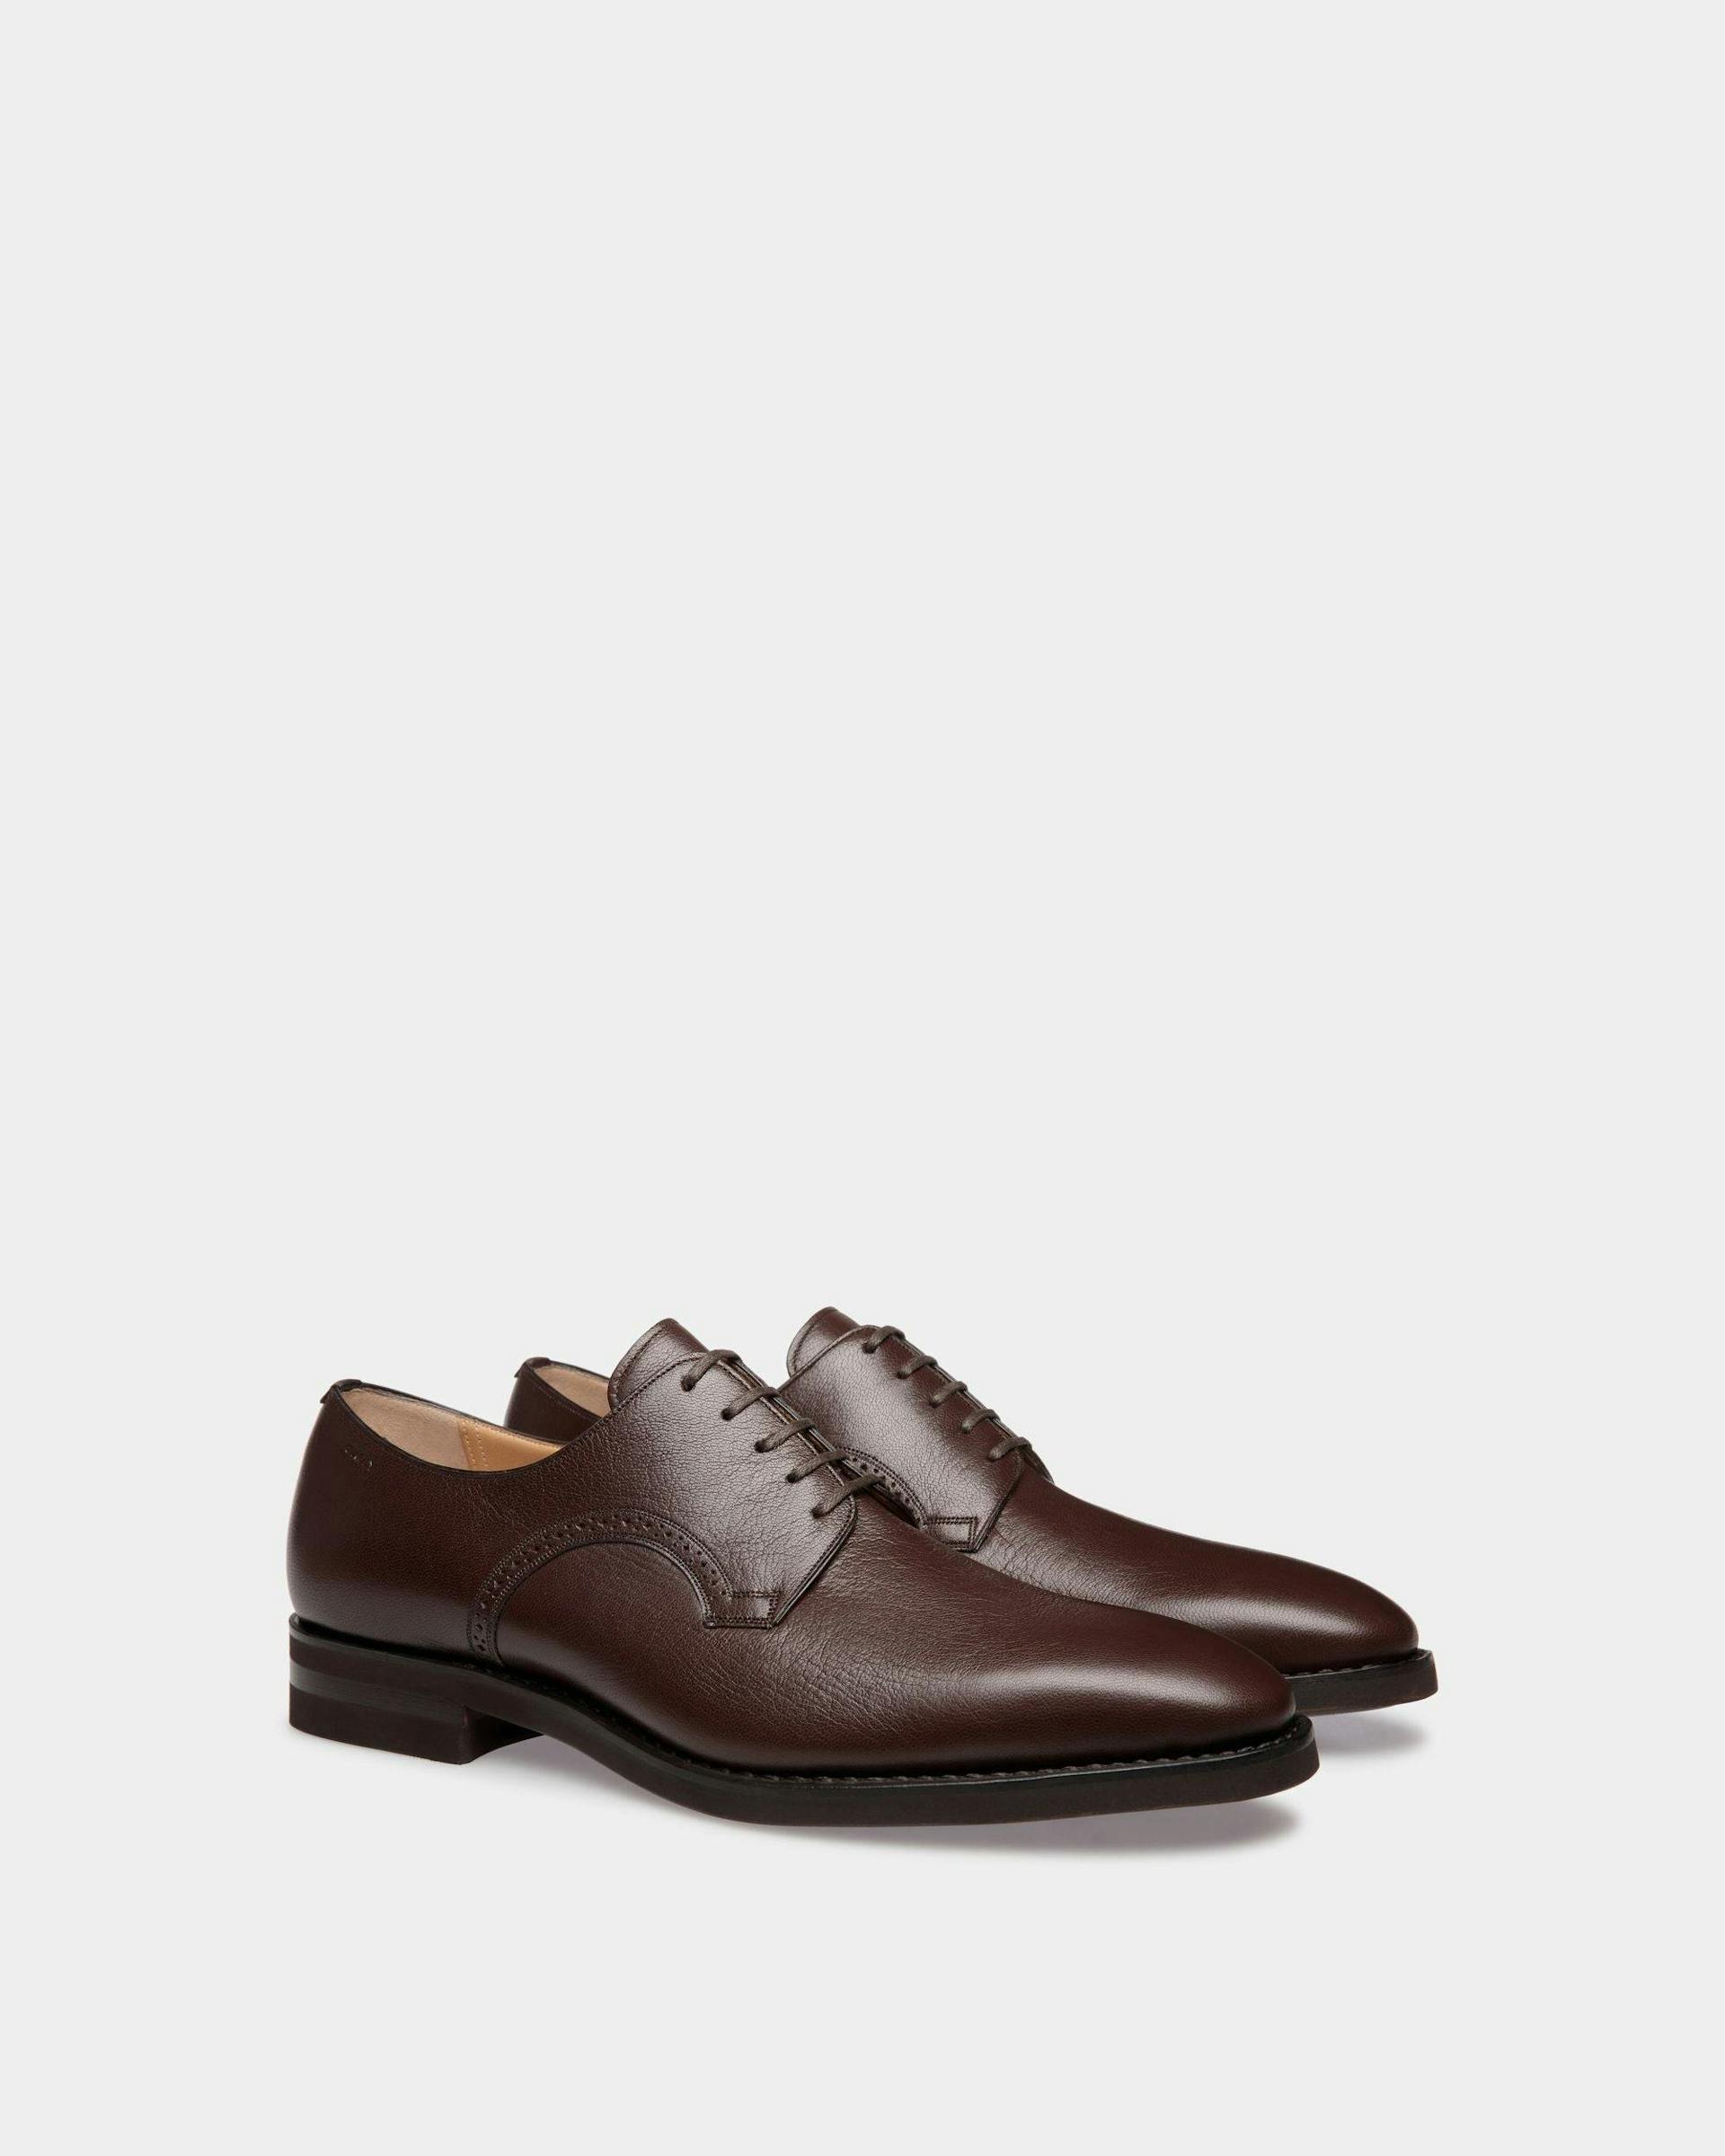 Men's Scribe Derby in Brown Grained Leather | Bally | Still Life 3/4 Back